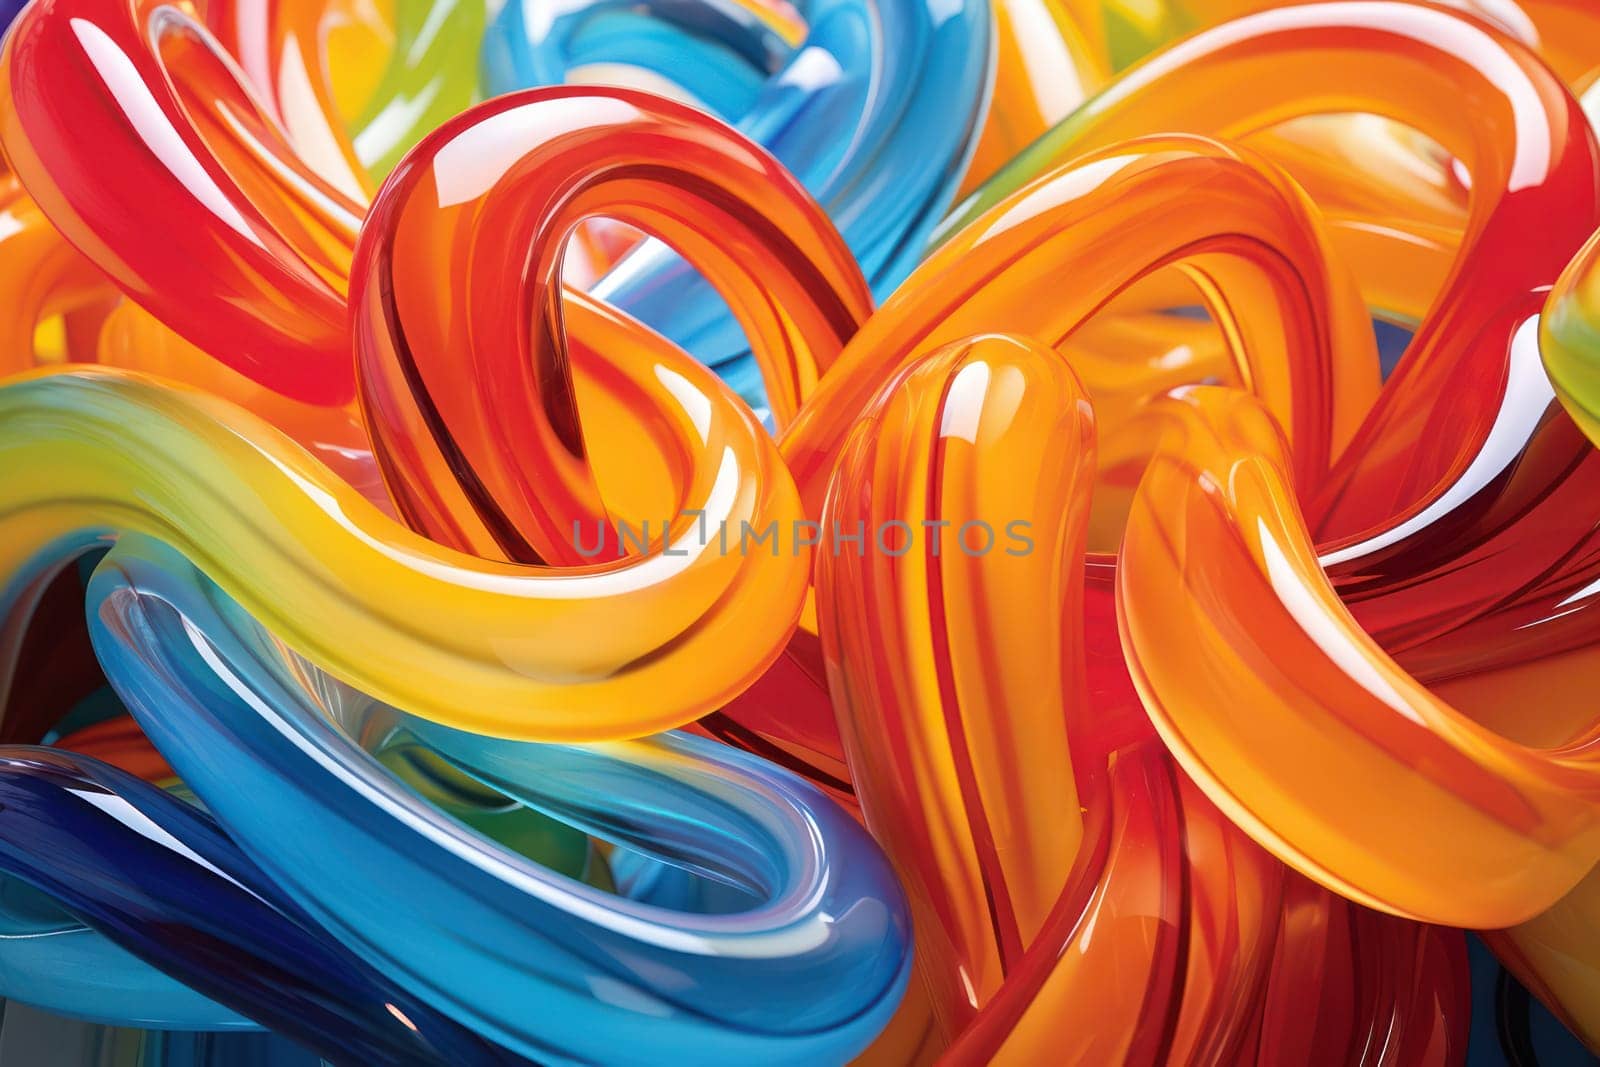 Vibrant Colorful Rainbow Swirl: A Creative Closeup of Delicious and Unhealthy Candy on a Bright Abstract Background